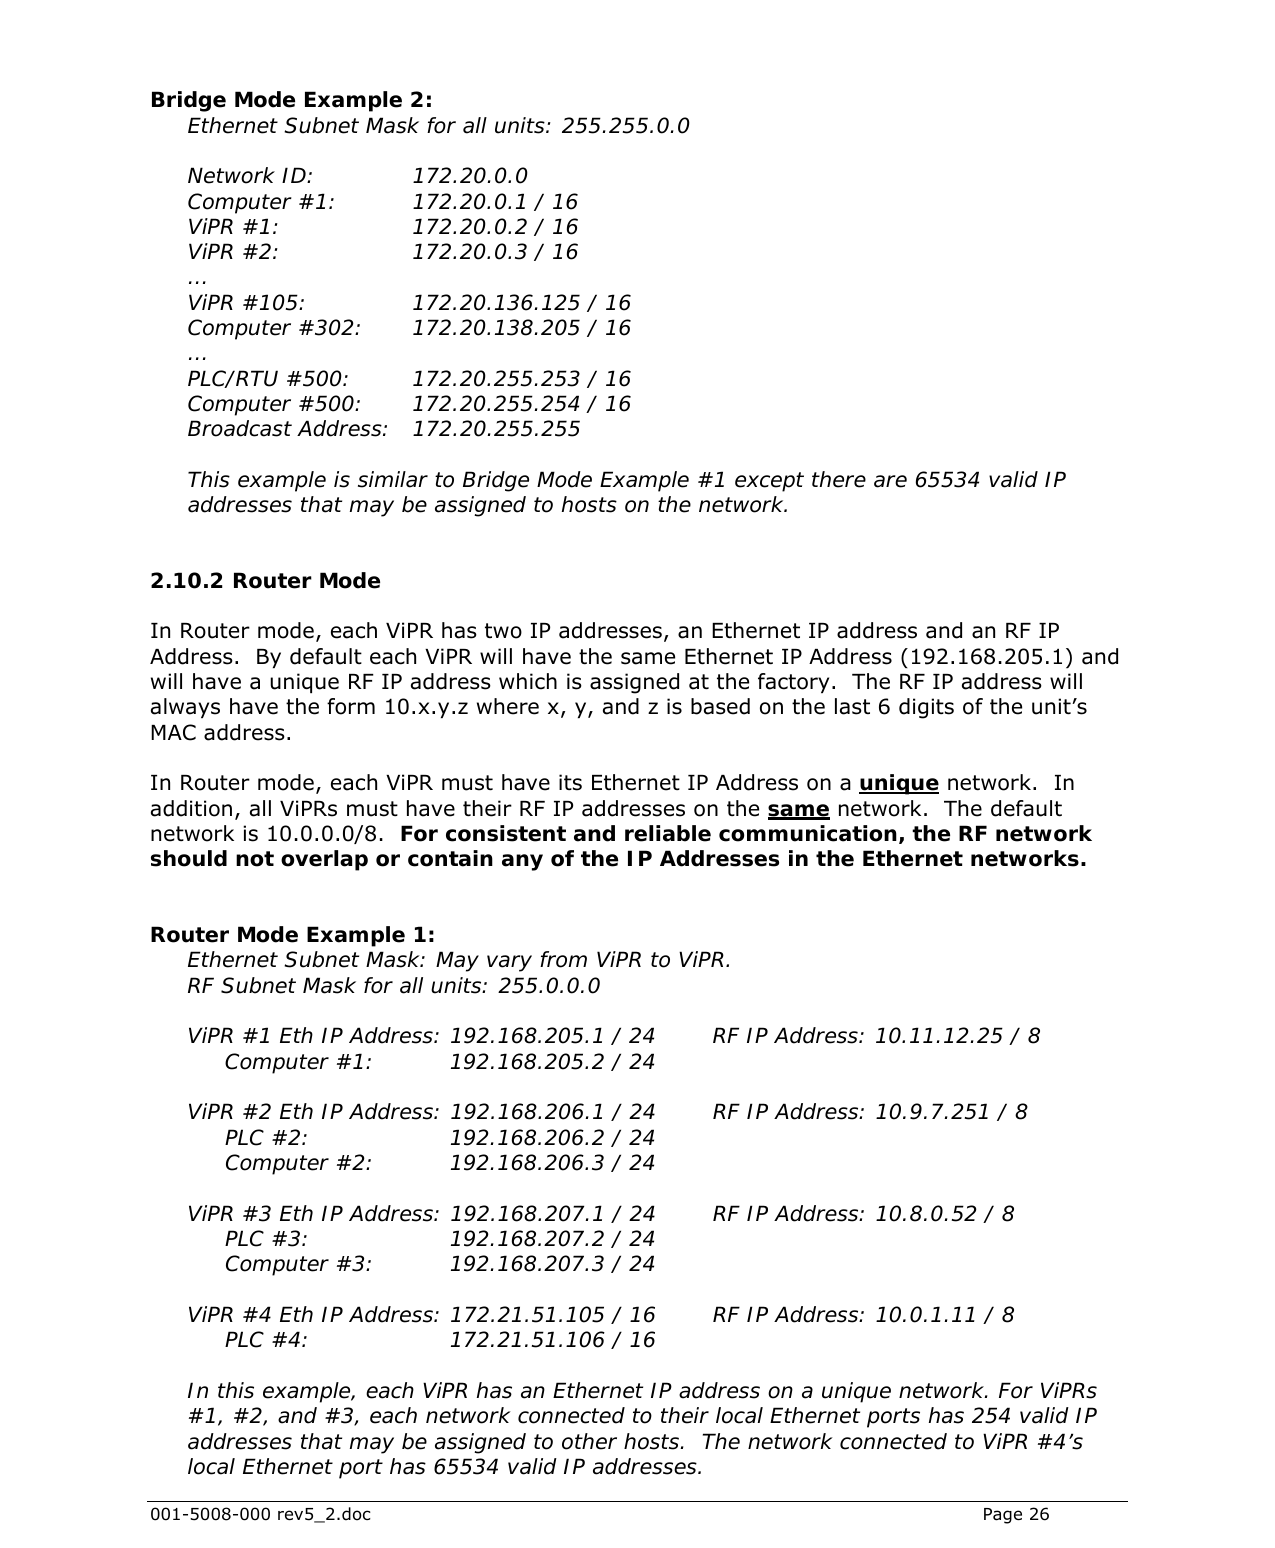  001-5008-000 rev5_2.doc    Page 26  Bridge Mode Example 2: Ethernet Subnet Mask for all units: 255.255.0.0  Network ID:    172.20.0.0 Computer #1:    172.20.0.1 / 16 ViPR #1:     172.20.0.2 / 16 ViPR #2:     172.20.0.3 / 16 … ViPR #105:       172.20.136.125 / 16 Computer #302:   172.20.138.205 / 16 … PLC/RTU #500:    172.20.255.253 / 16 Computer #500:    172.20.255.254 / 16 Broadcast Address:   172.20.255.255  This example is similar to Bridge Mode Example #1 except there are 65534 valid IP addresses that may be assigned to hosts on the network.  2.10.2  Router Mode In Router mode, each ViPR has two IP addresses, an Ethernet IP address and an RF IP Address.  By default each ViPR will have the same Ethernet IP Address (192.168.205.1) and will have a unique RF IP address which is assigned at the factory.  The RF IP address will always have the form 10.x.y.z where x, y, and z is based on the last 6 digits of the unit’s MAC address.  In Router mode, each ViPR must have its Ethernet IP Address on a unique network.  In addition, all ViPRs must have their RF IP addresses on the same network.  The default network is 10.0.0.0/8.  For consistent and reliable communication, the RF network should not overlap or contain any of the IP Addresses in the Ethernet networks.   Router Mode Example 1:  Ethernet Subnet Mask: May vary from ViPR to ViPR. RF Subnet Mask for all units: 255.0.0.0  ViPR #1 Eth IP Address: 192.168.205.1 / 24    RF IP Address: 10.11.12.25 / 8 Computer #1:     192.168.205.2 / 24  ViPR #2 Eth IP Address: 192.168.206.1 / 24    RF IP Address: 10.9.7.251 / 8  PLC #2:     192.168.206.2 / 24  Computer #2:  192.168.206.3 / 24  ViPR #3 Eth IP Address: 192.168.207.1 / 24    RF IP Address: 10.8.0.52 / 8  PLC #3:     192.168.207.2 / 24  Computer #3:  192.168.207.3 / 24  ViPR #4 Eth IP Address: 172.21.51.105 / 16    RF IP Address: 10.0.1.11 / 8  PLC #4:     172.21.51.106 / 16  In this example, each ViPR has an Ethernet IP address on a unique network. For ViPRs #1, #2, and #3, each network connected to their local Ethernet ports has 254 valid IP addresses that may be assigned to other hosts.  The network connected to ViPR #4’s local Ethernet port has 65534 valid IP addresses. 